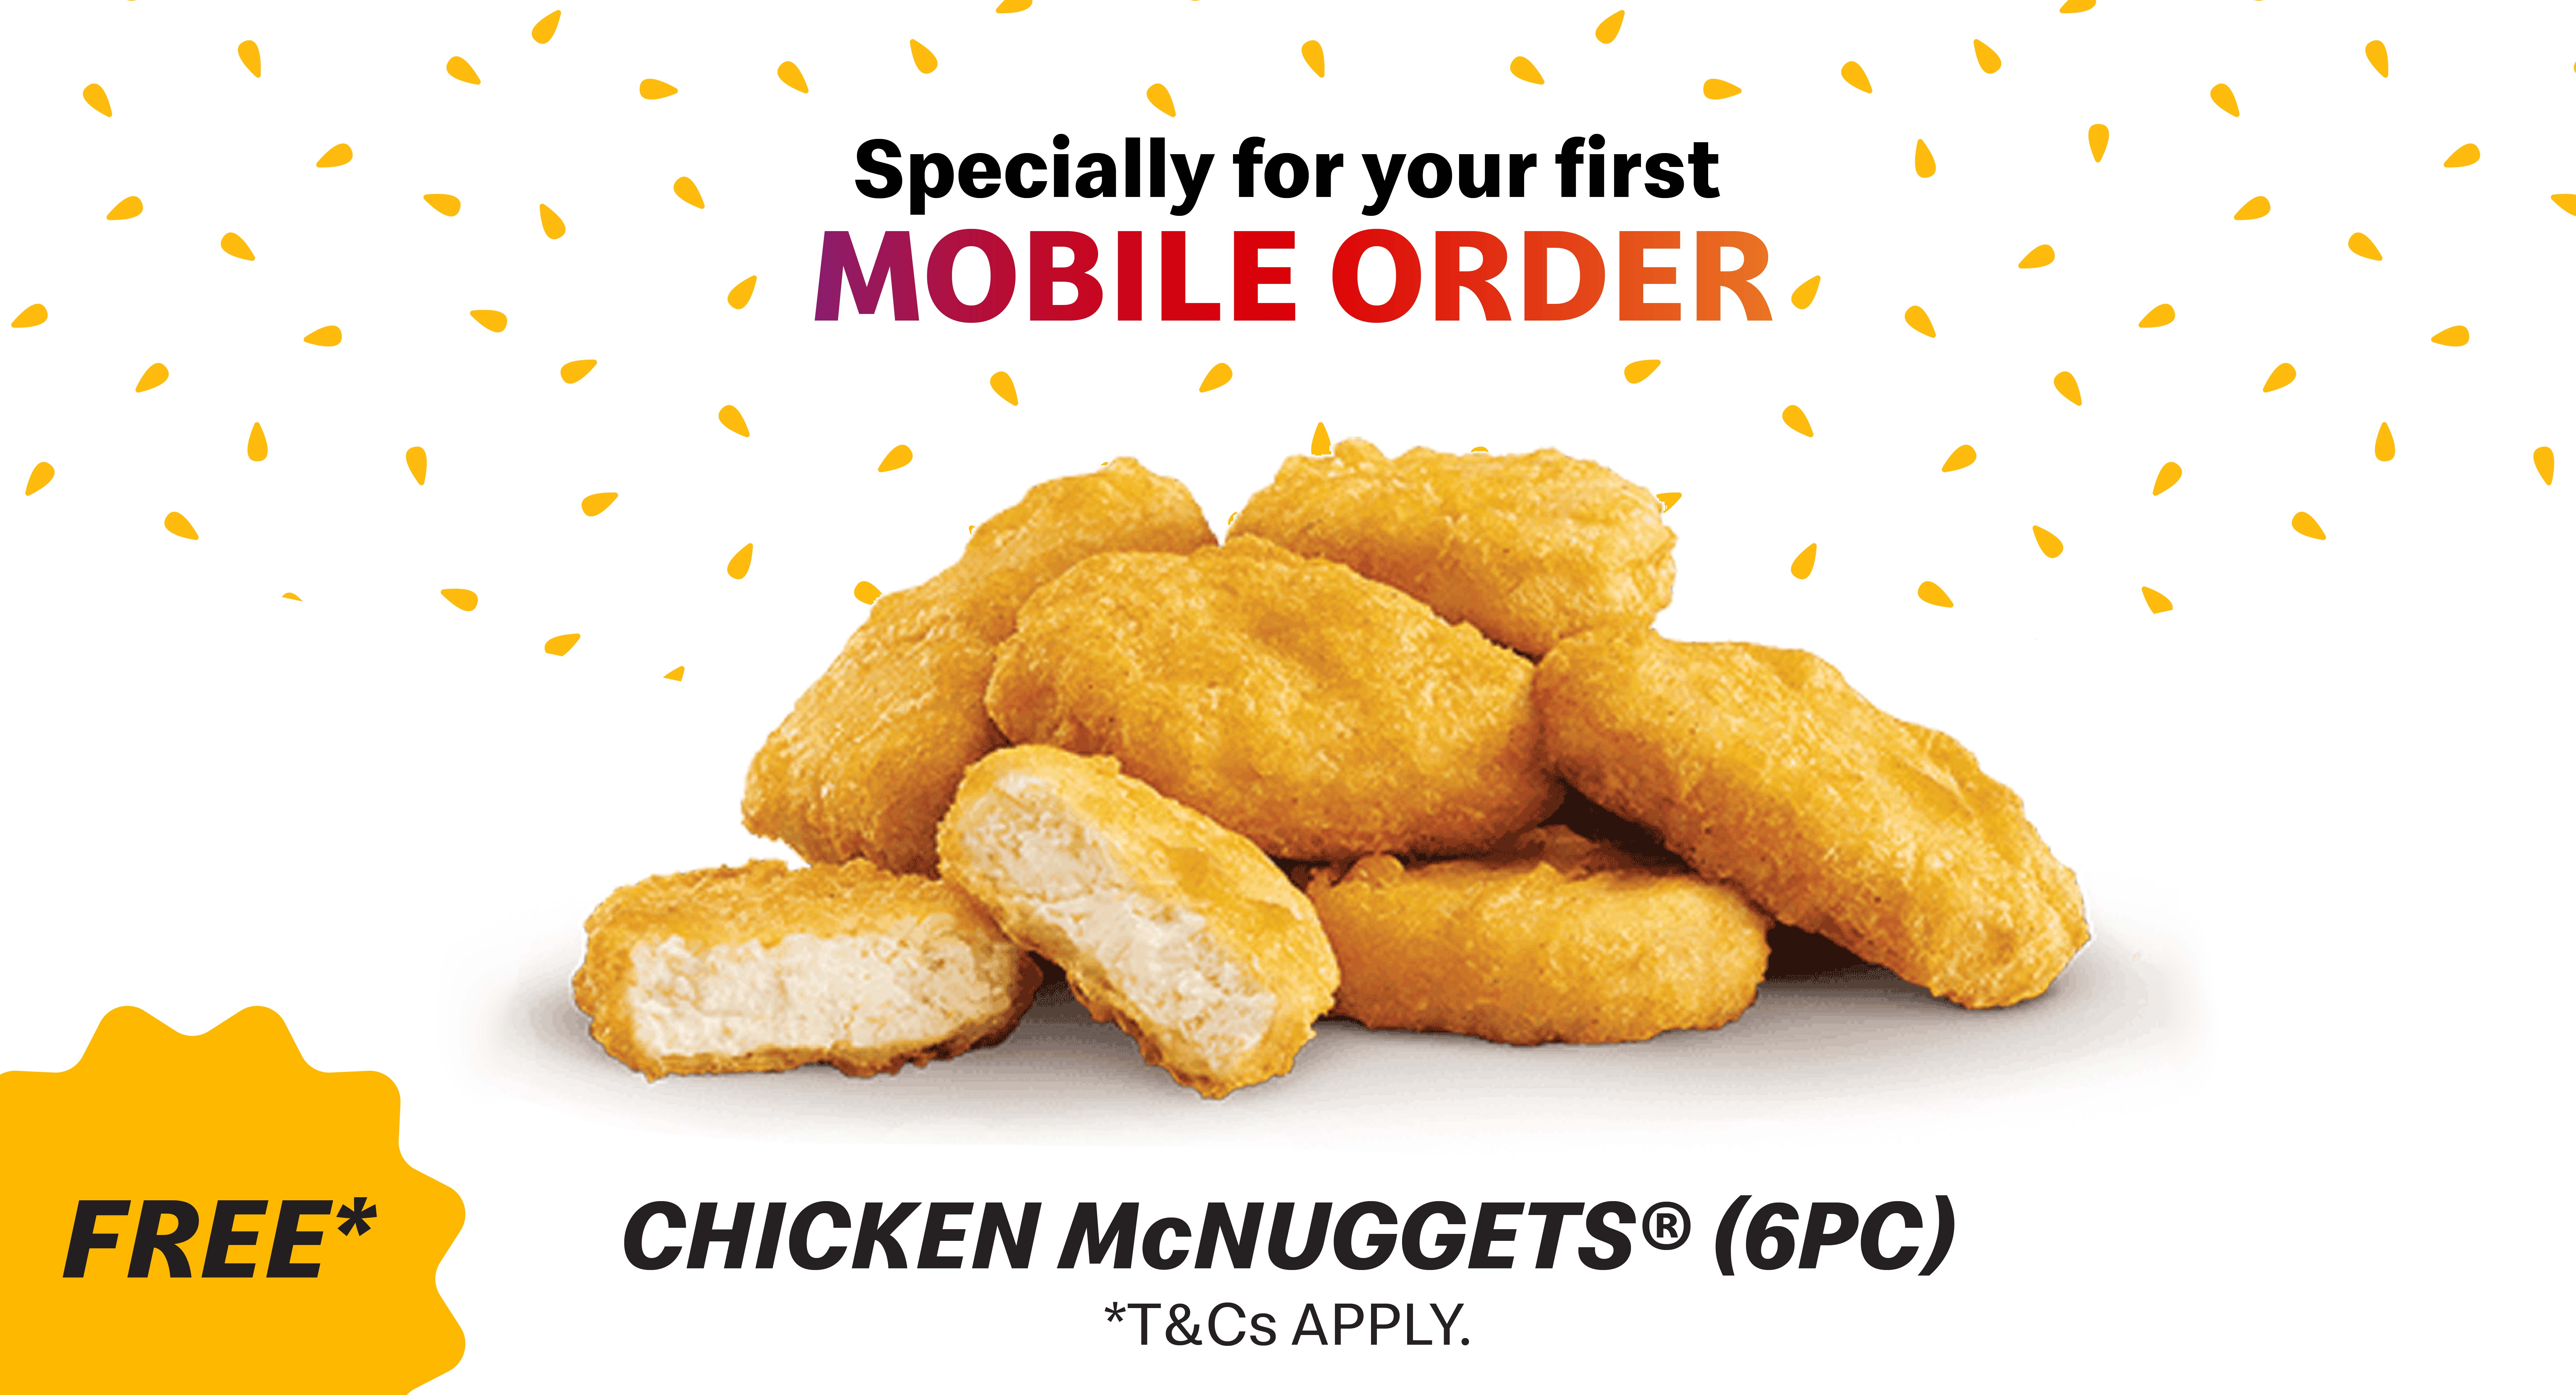 6 nuggets deal